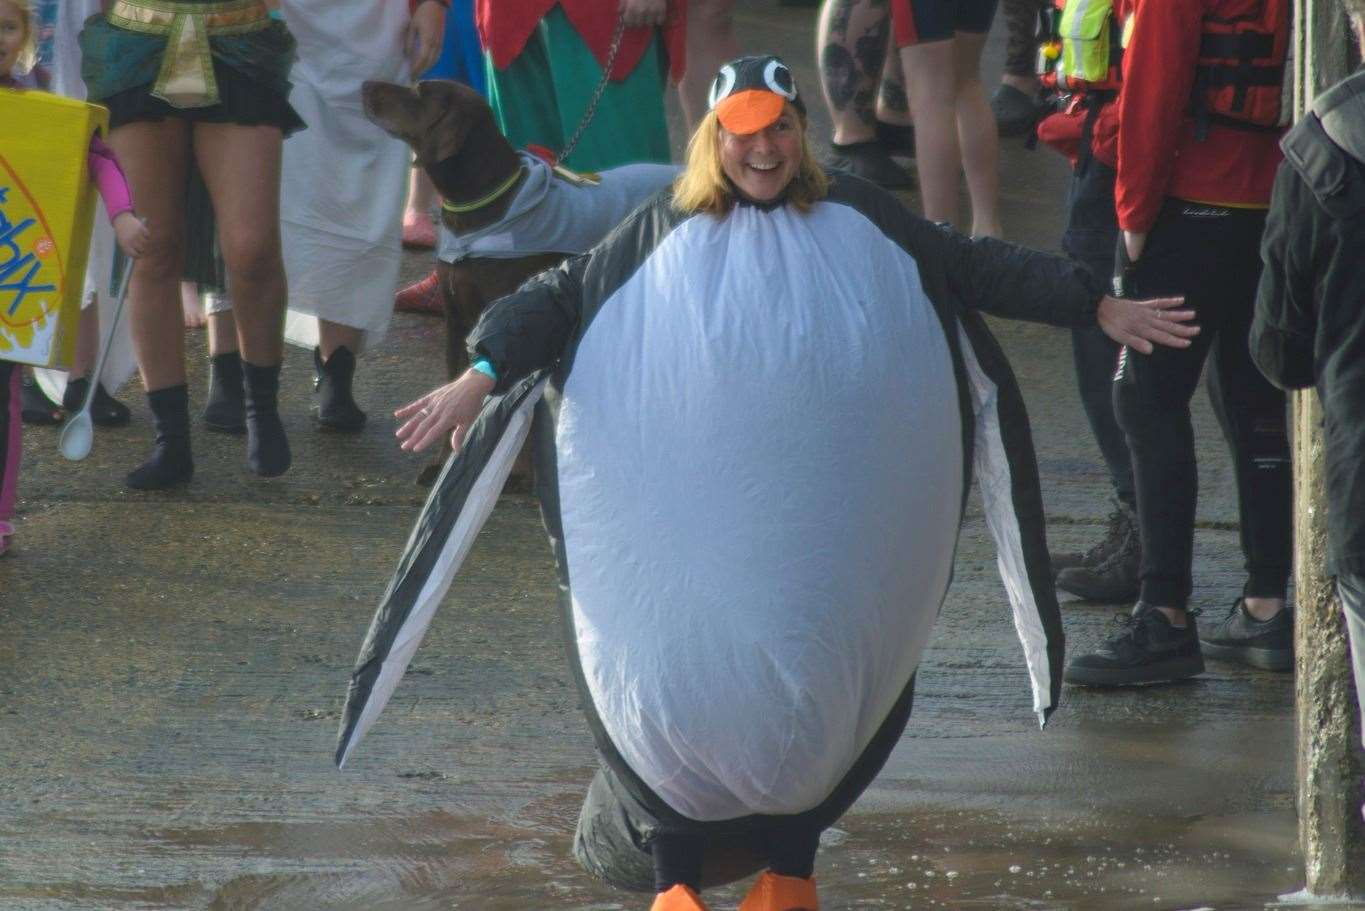 Hundreds took to the water at Folkestone's Sunny Sands for the annual Boxing Day Dip including a penguin who should have been more used to the plunging temperatures. Picture: Shaun Ranger/Folkestone, Hythe and District Lions Club